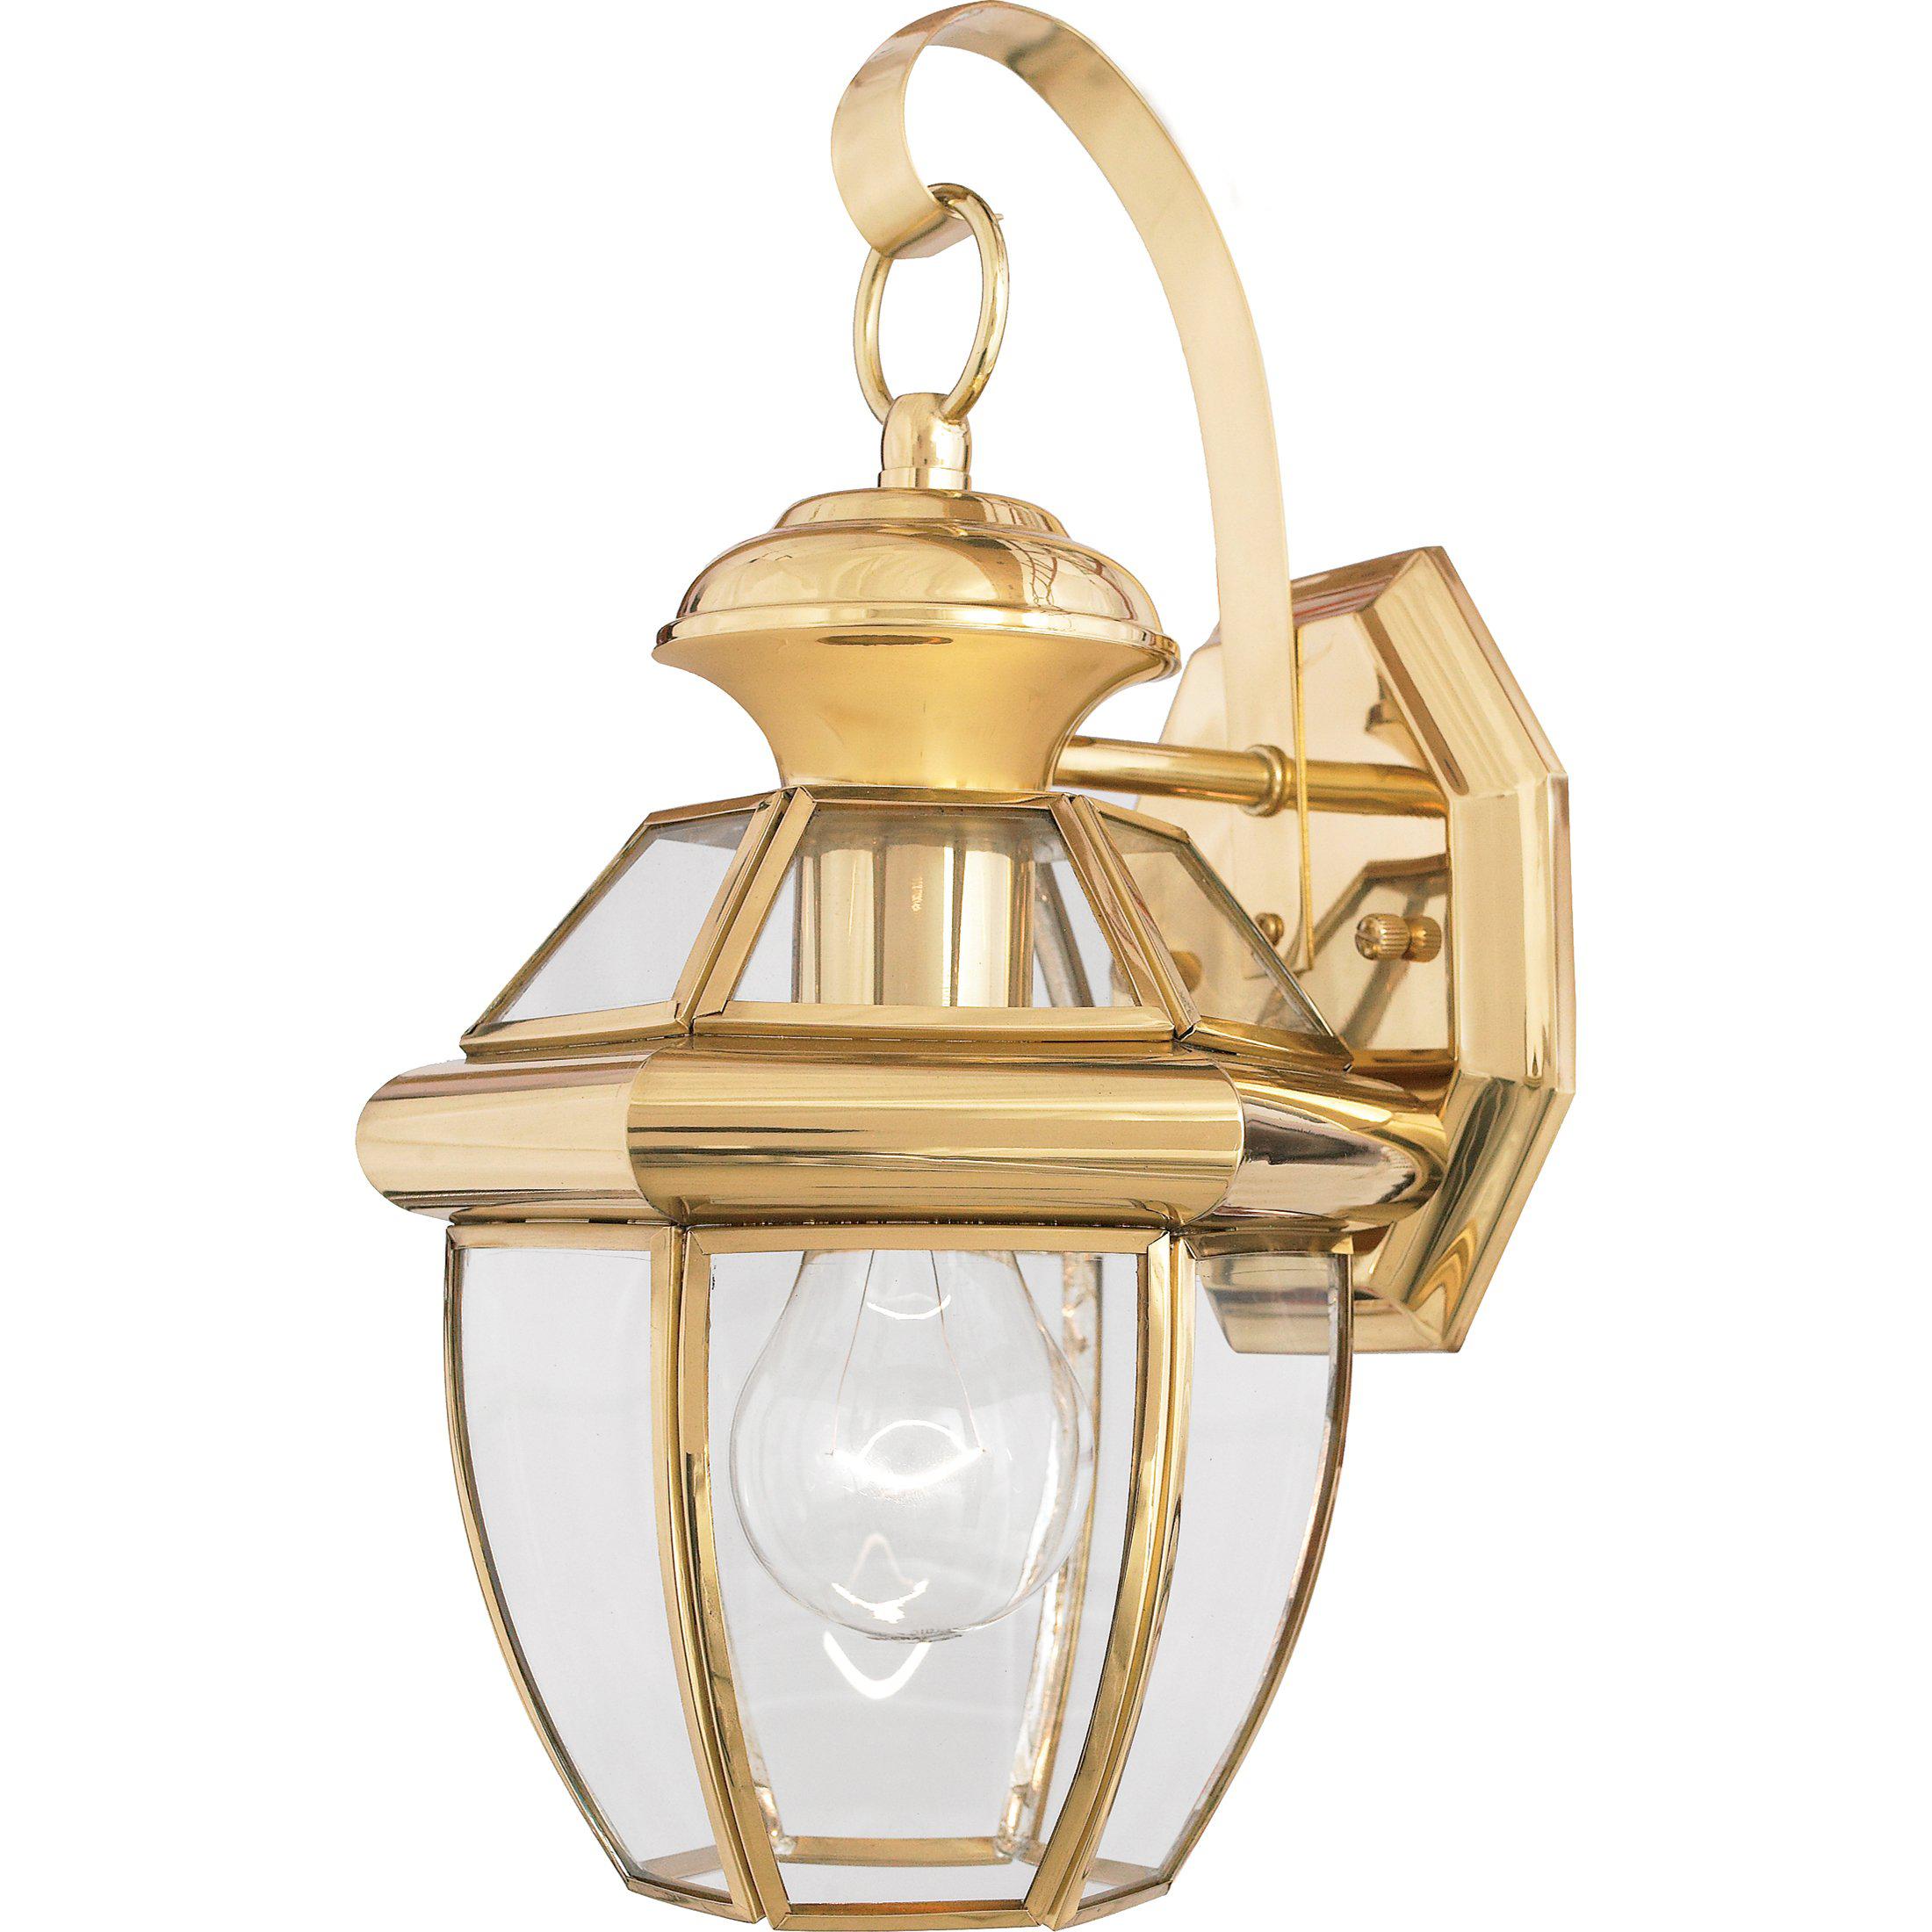 Quoizel  Newbury Outdoor Lantern, Small On-Sale Outdoor l Wall Quoizel Inc Polished Brass  